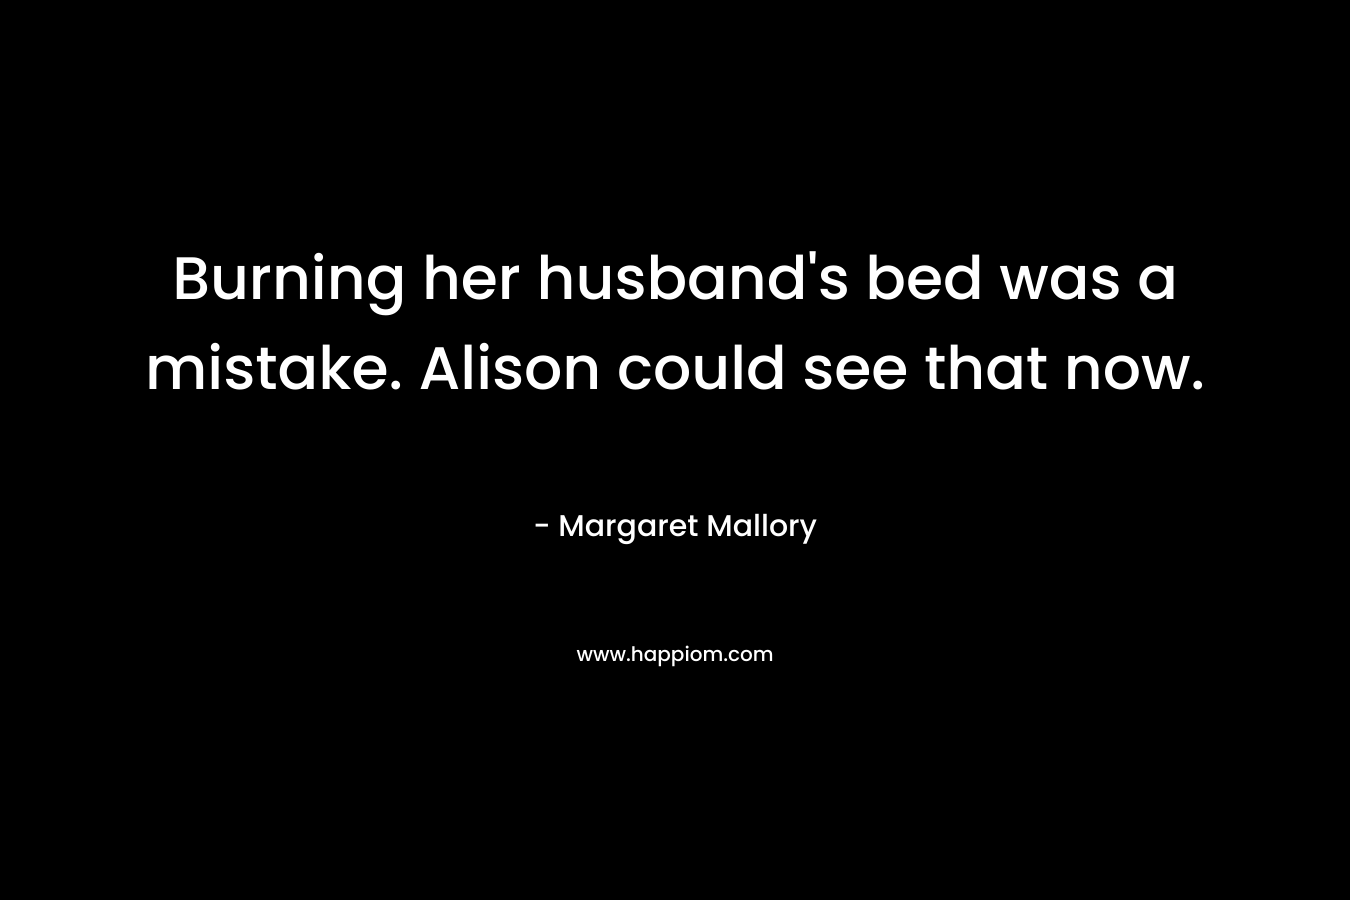 Burning her husband’s bed was a mistake. Alison could see that now. – Margaret Mallory